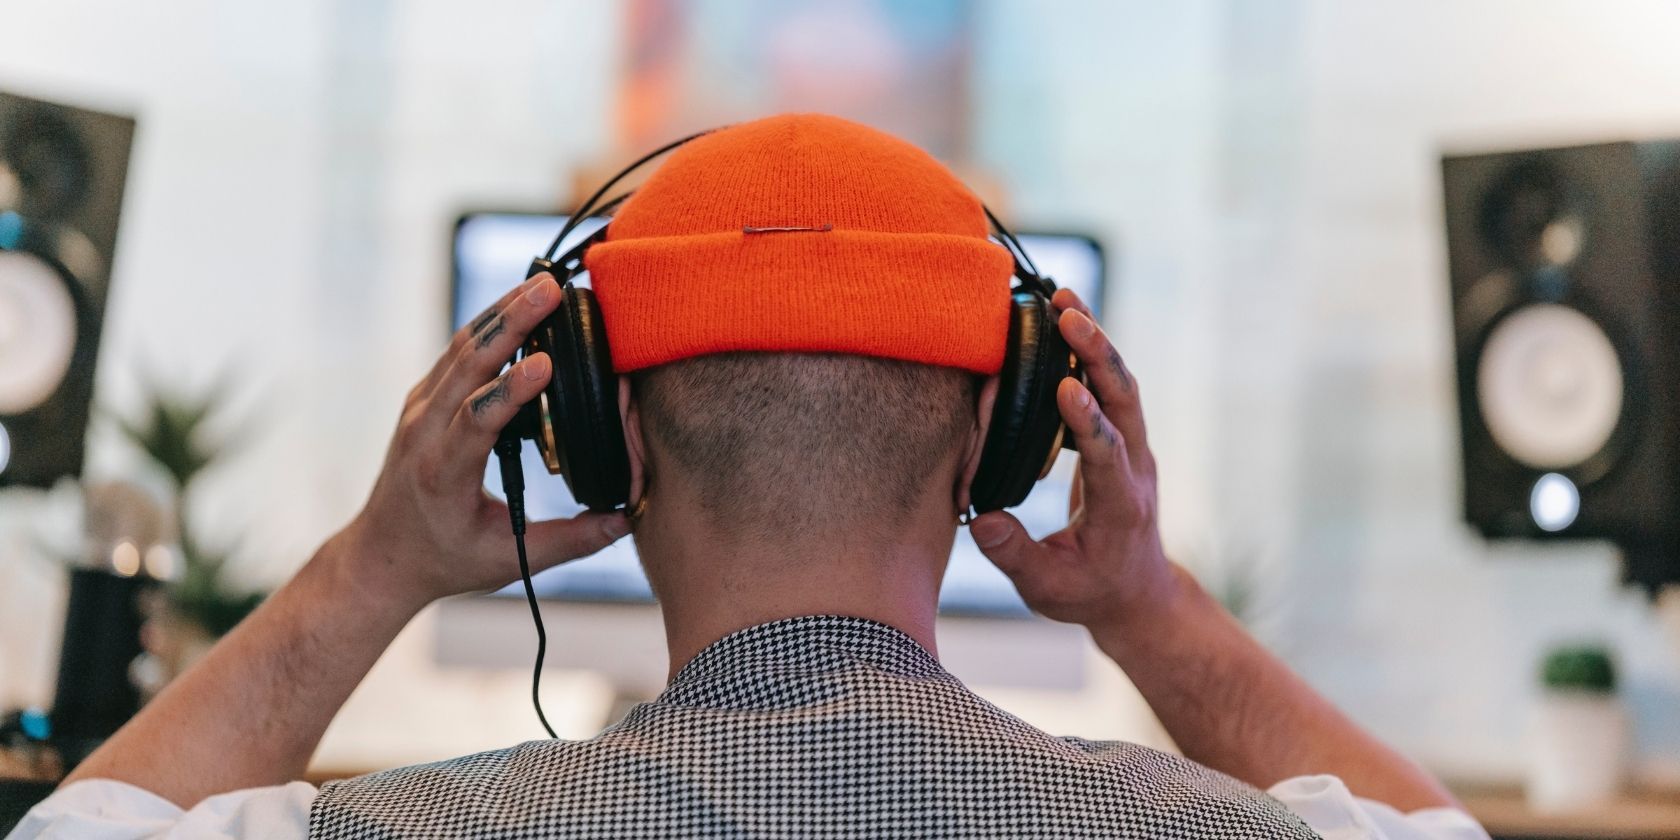 Man with headphones on in front of computer